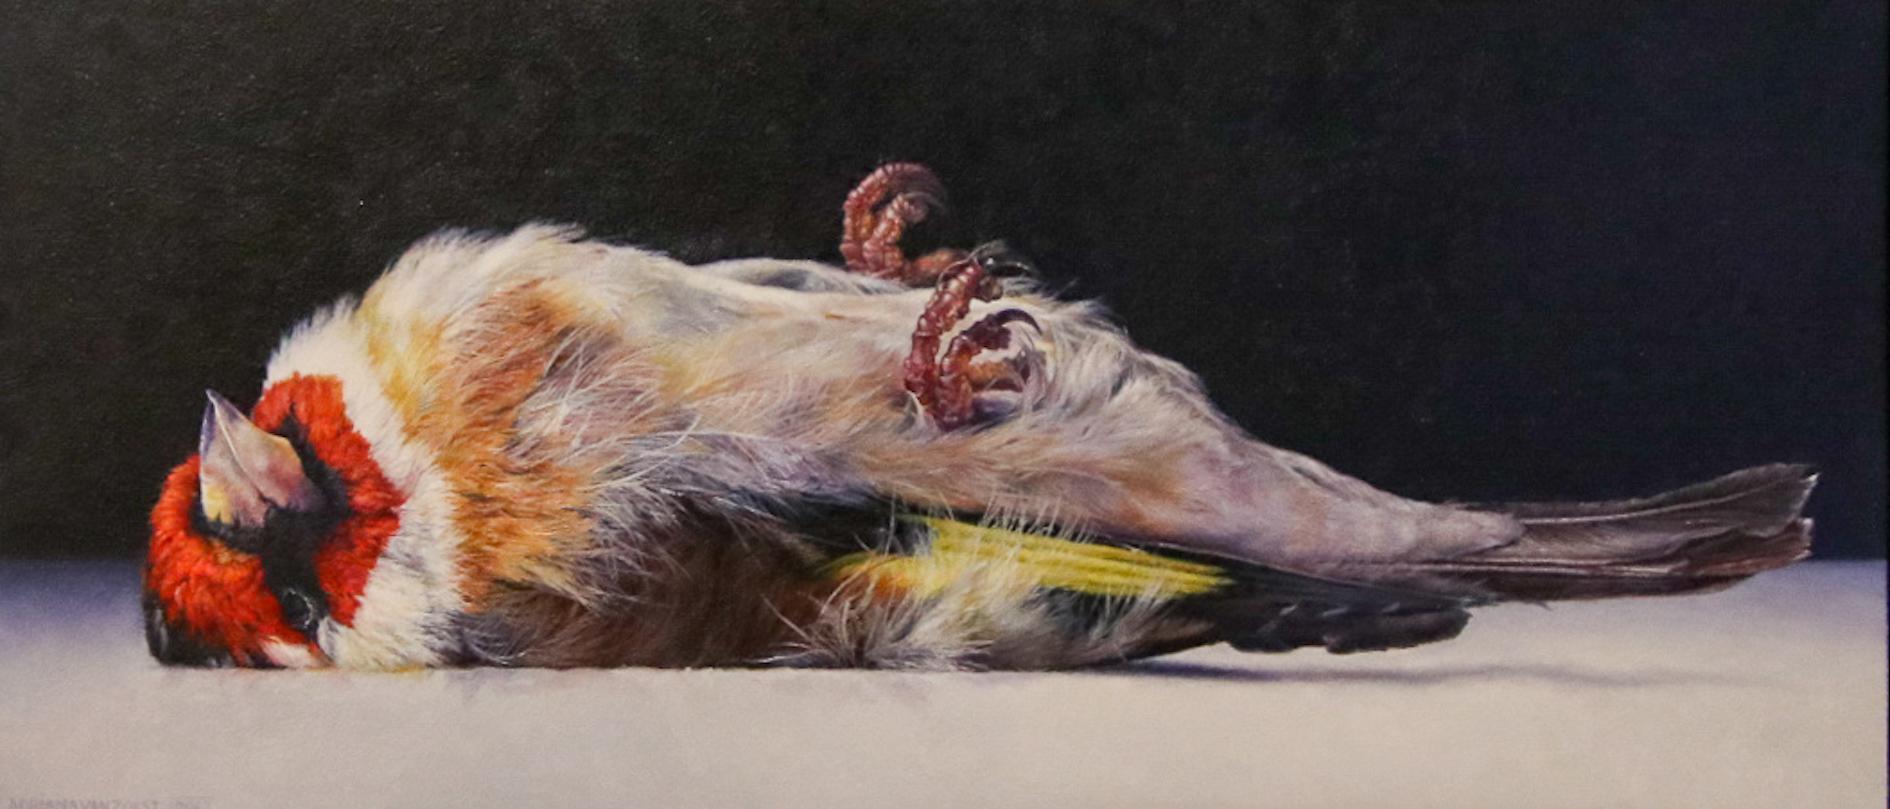 Adriana van Zoest  Figurative Painting - Putter - 21st Century Contemporary Animal Still-Life Painting of a Dead Bird